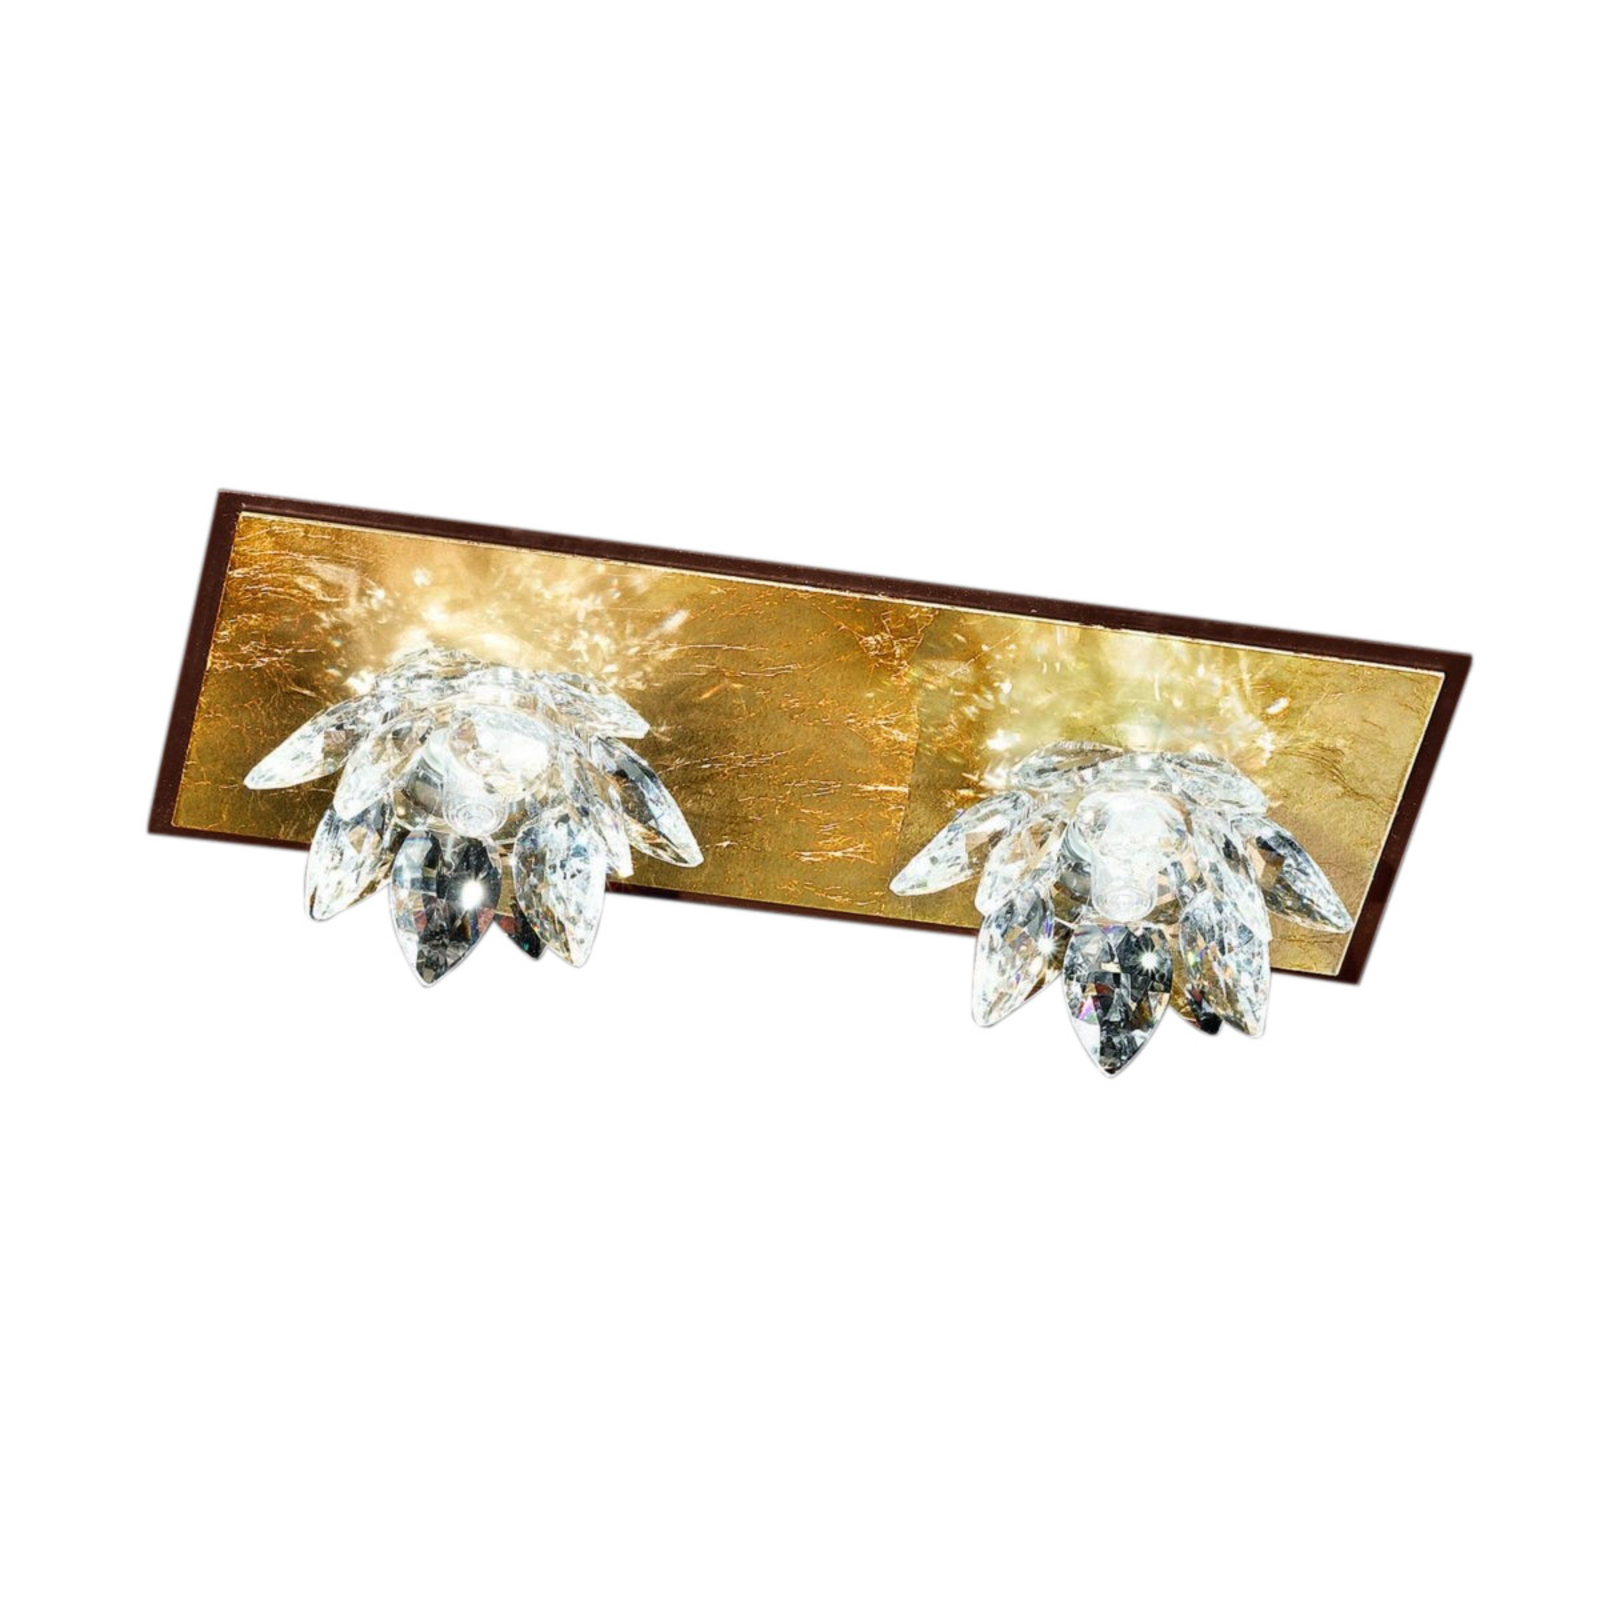 Fiore ceiling light, gold leaf and crystal, 2-bulb